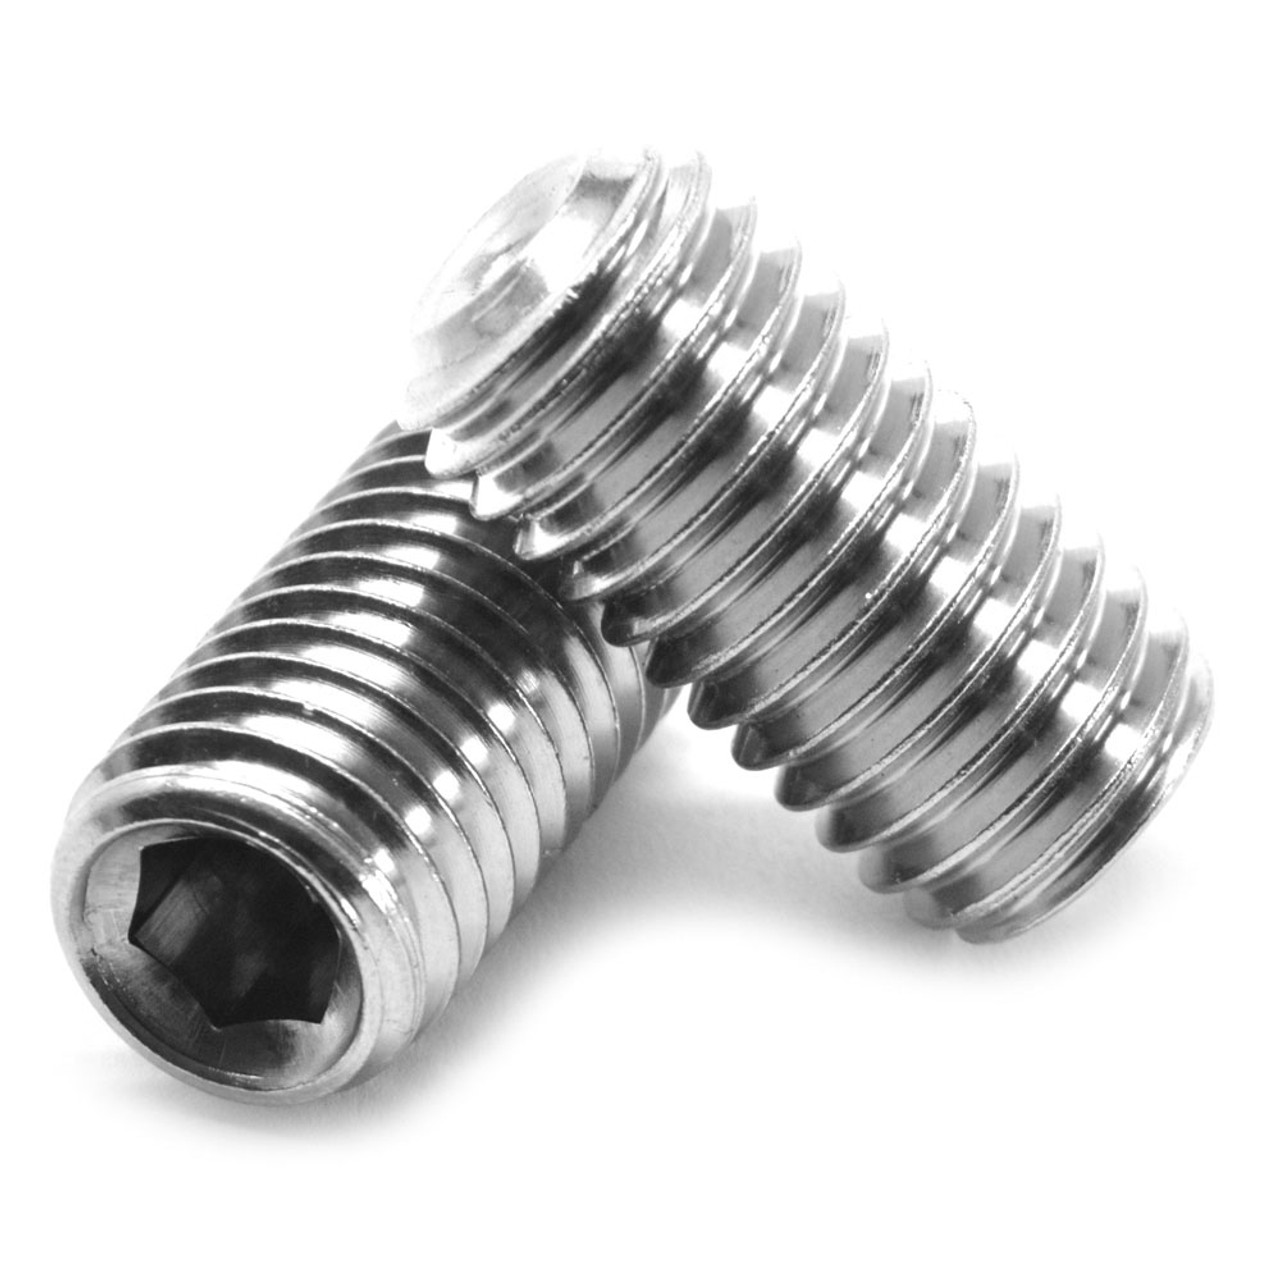 M6 x 1.00 x 10 MM Coarse Thread DIN 916 / ISO 4029 Socket Set Screw Cup Point Stainless Steel 316